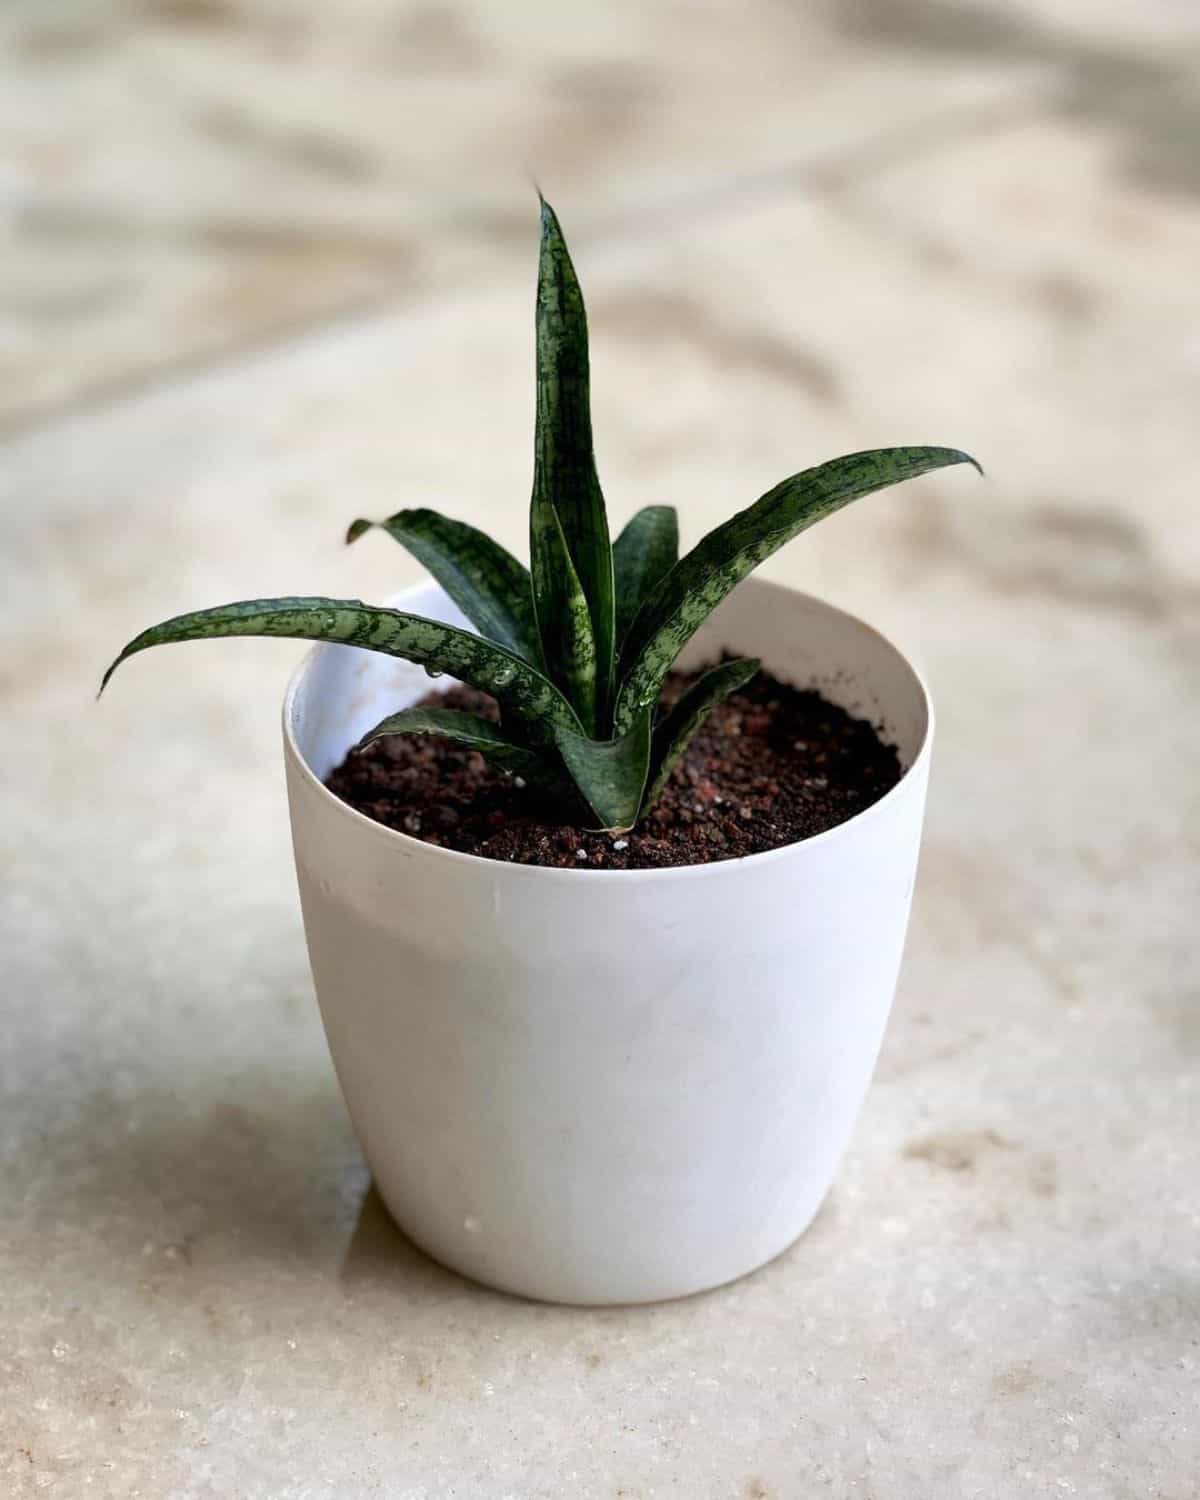 Sansevieria Macrophylla grows in a white pot.